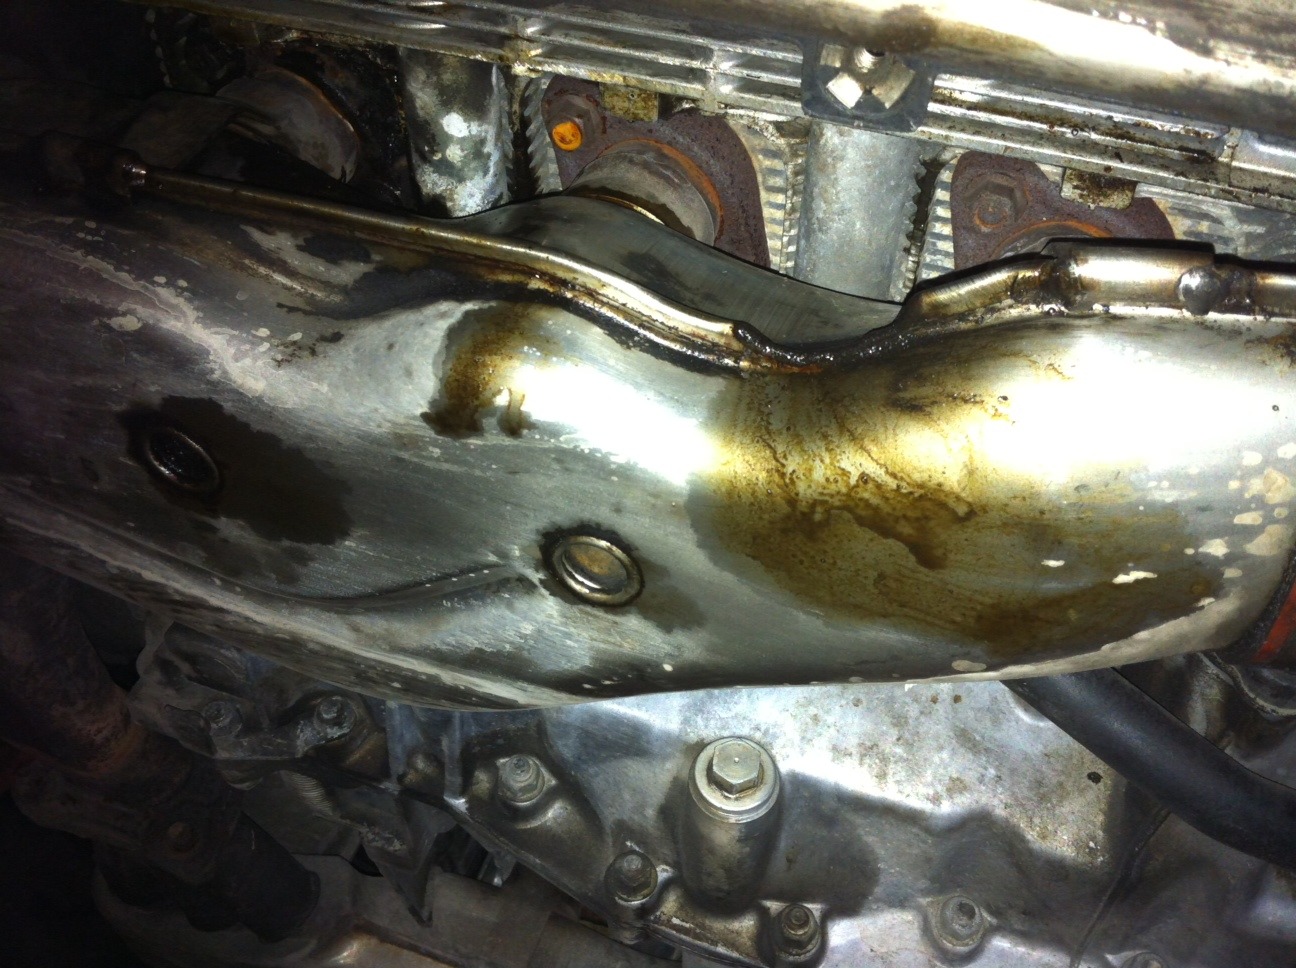 Why do I need to fix oil leaks?